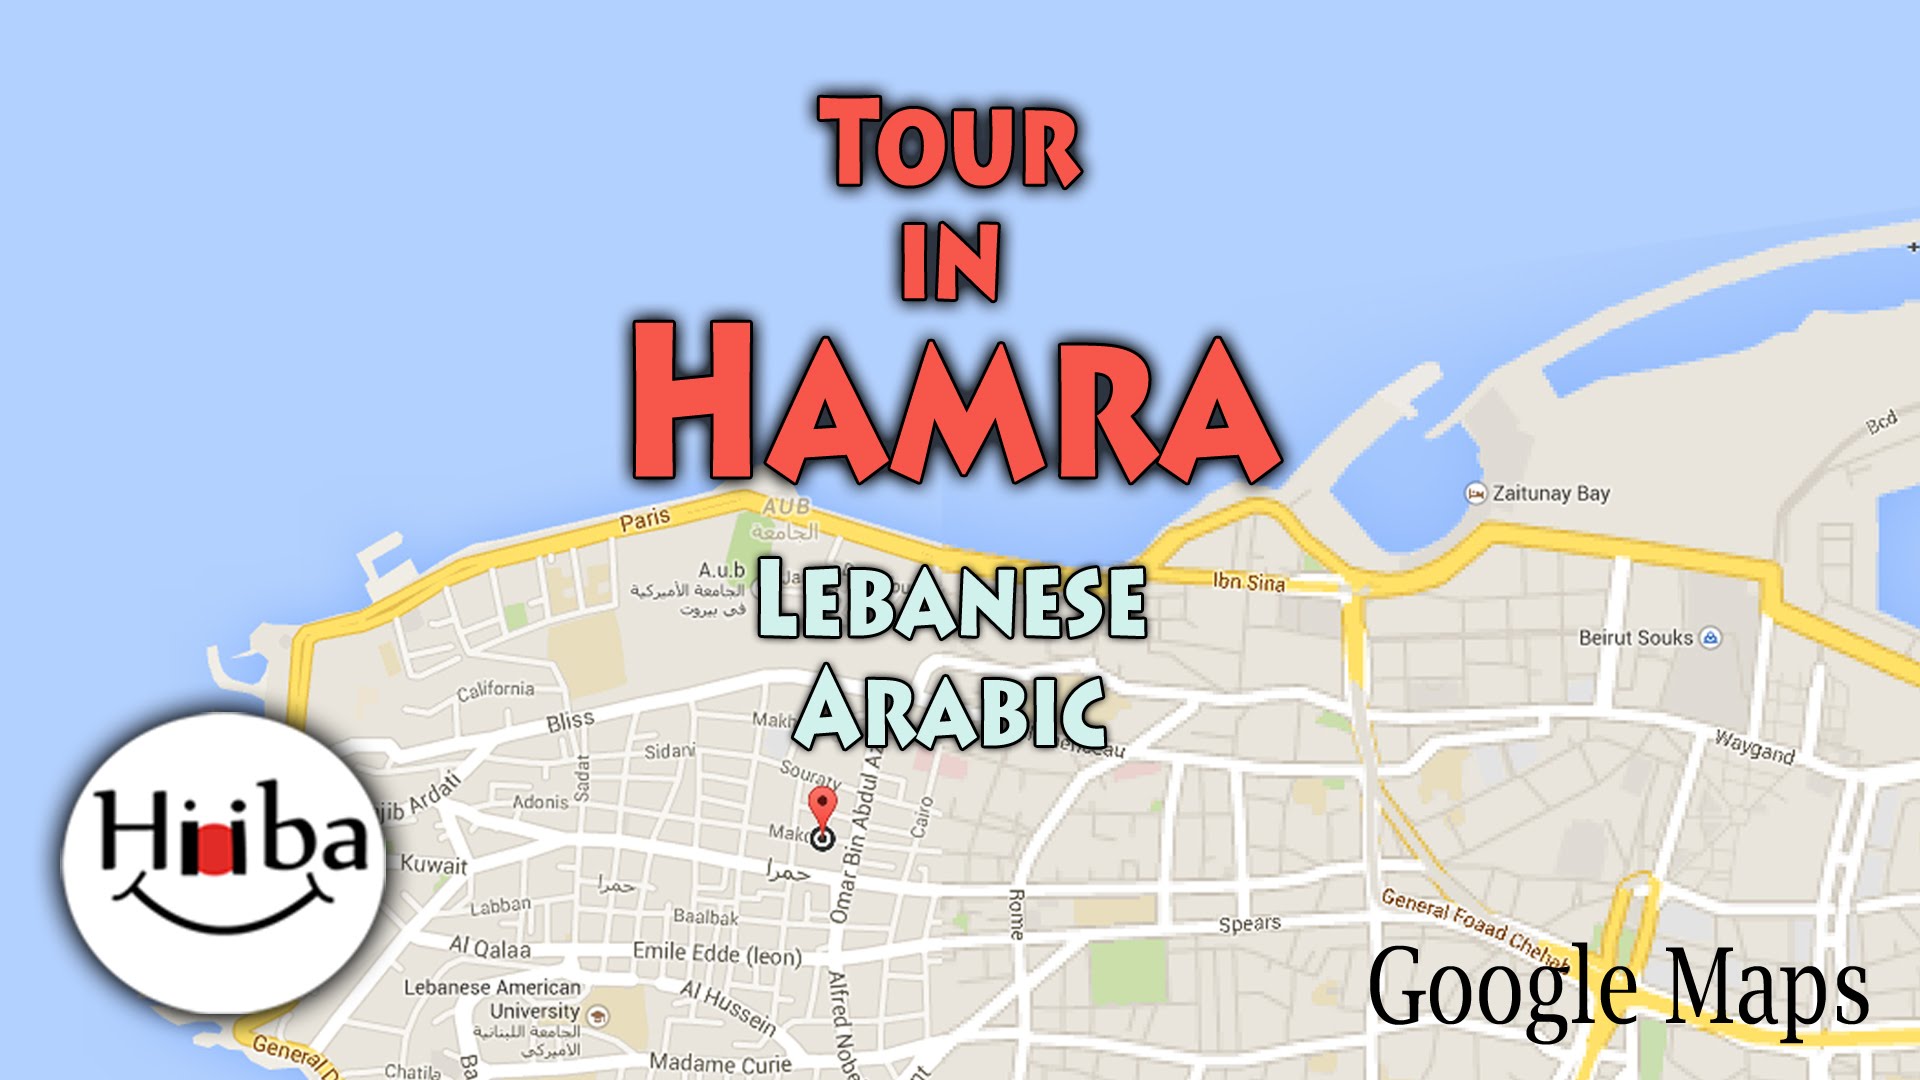 Thumbnail showing a part of the map of Beirut, with the title 'Tour in Hamra' written in Red